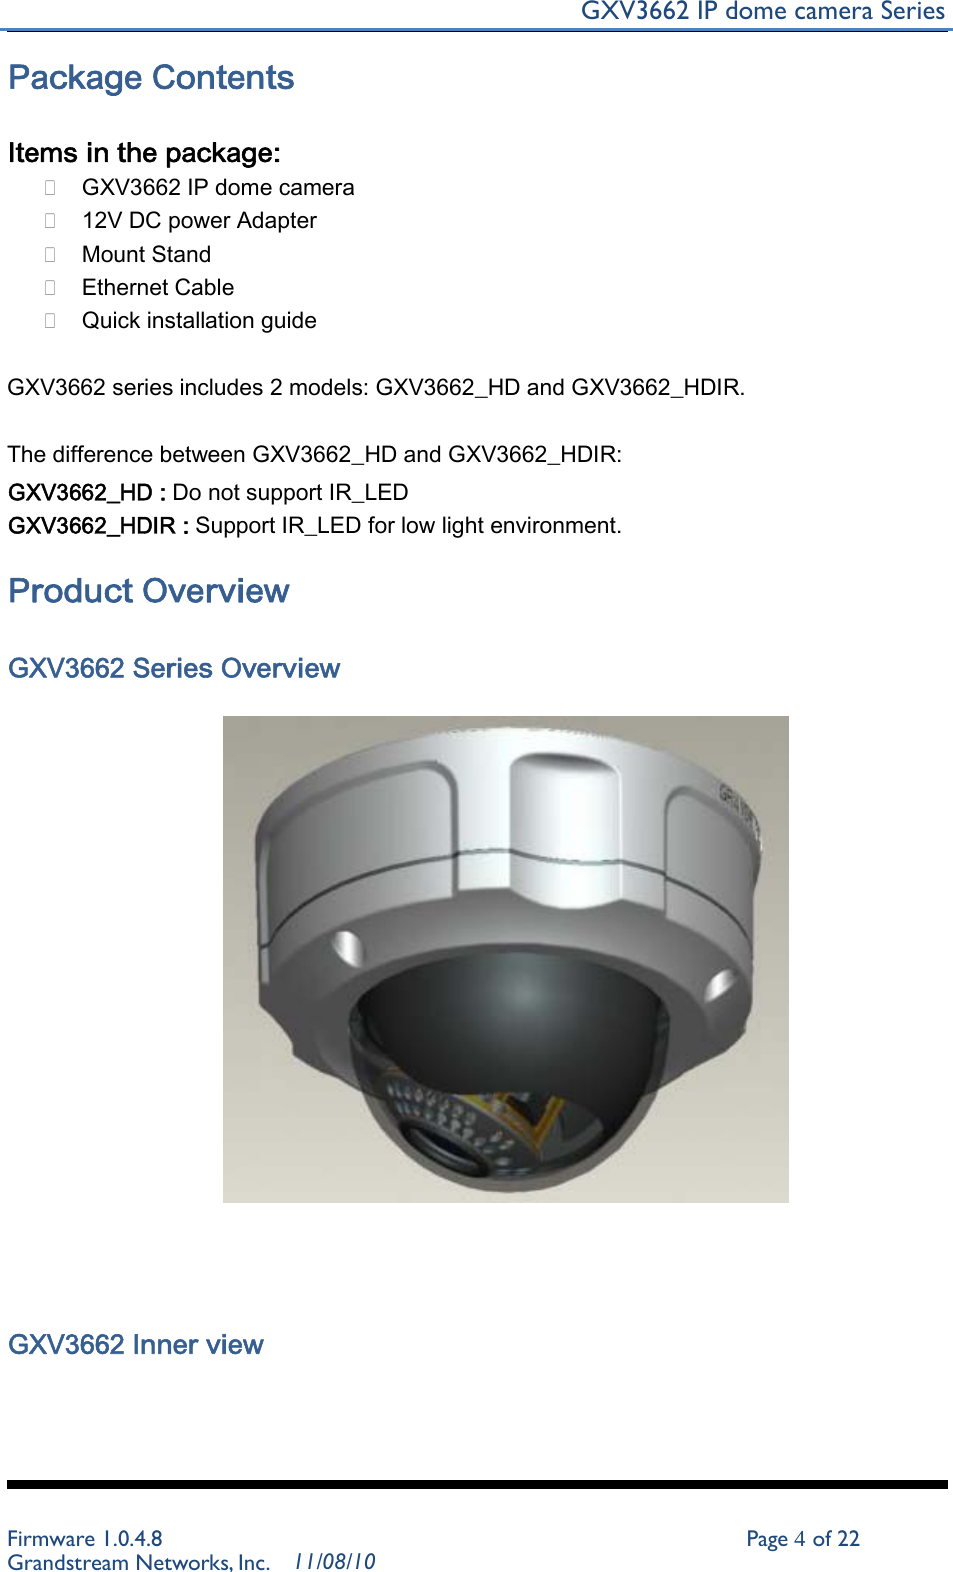 GXV3662 IP dome camera Series   Package Contents   Items in the package:  GXV3662 IP dome camera  12V DC power Adapter  Mount Stand  Ethernet Cable  Quick installation guide GXV3662 series includes 2 models: GXV3662_HD and GXV3662_HDIR. The difference between GXV3662_HD and GXV3662_HDIR: GXV3662_HD : Do not support IR_LED GXV3662_HDIR : Support IR_LED for low light environment.  Product Overview   GXV3662 Series Overview               GXV3662 Inner view         Firmware 1.0.4.8 Page 4 of 22 Grandstream Networks, Inc. 11/08/10 